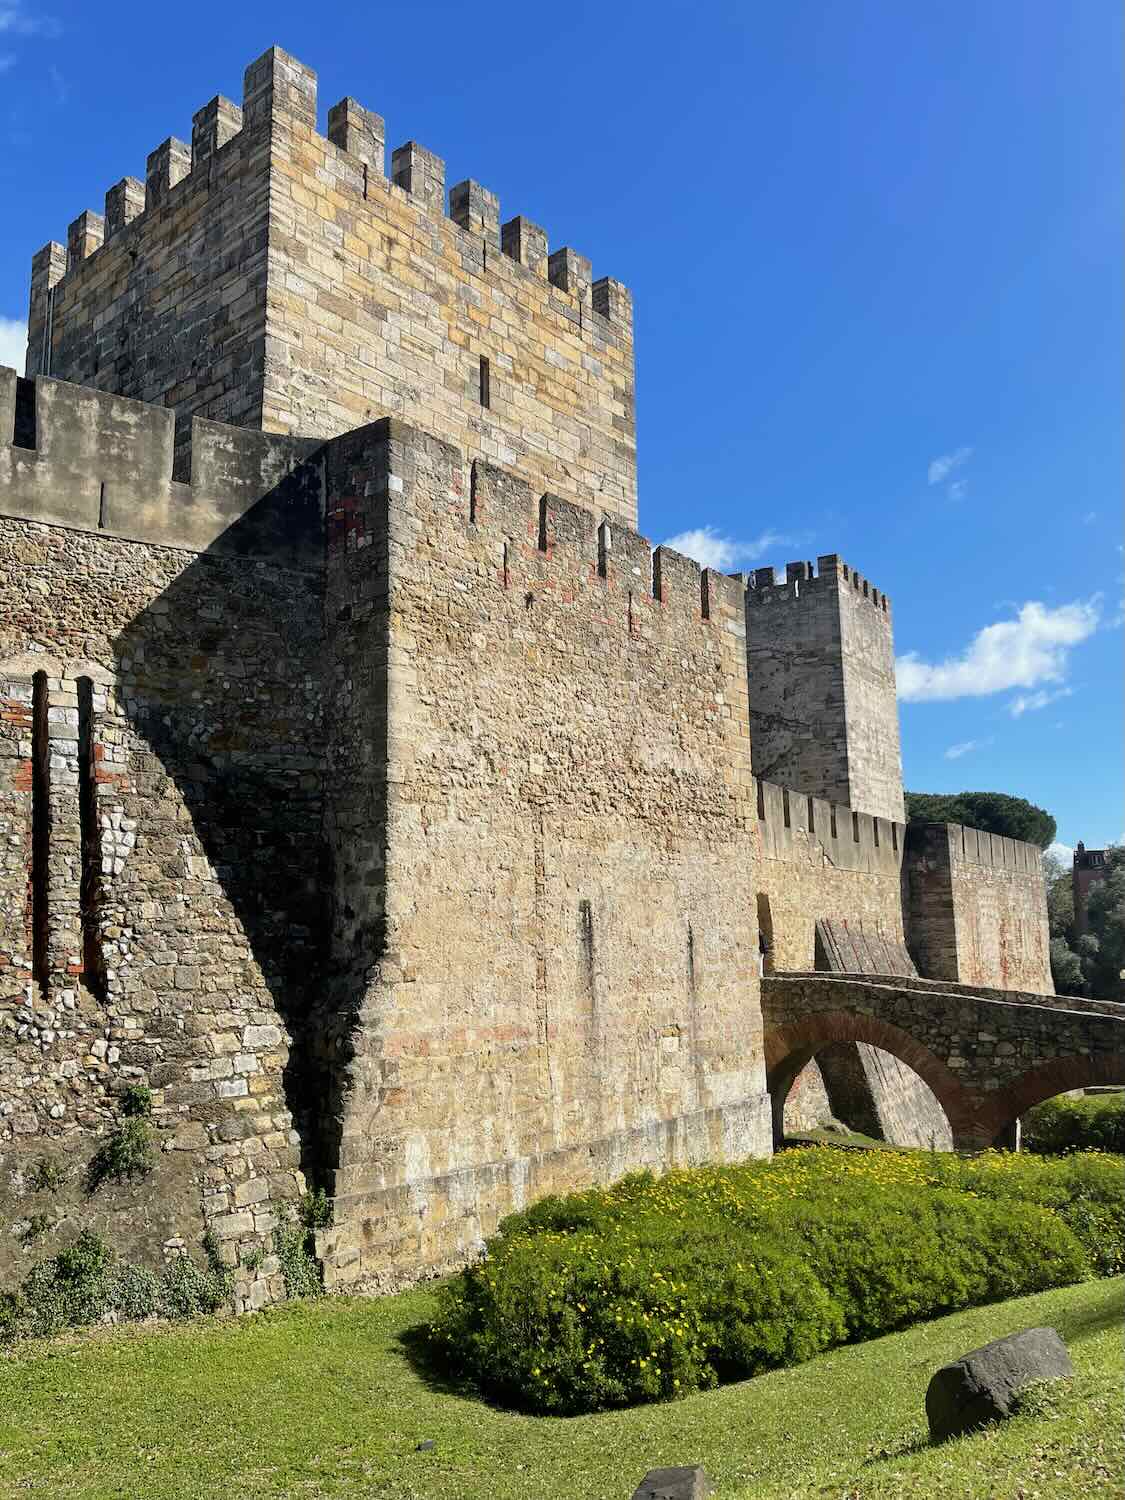 The imposing walls and towers of São Jorge Castle under a bright blue sky, a testament to Lisbon's medieval history and a popular viewpoint for panoramic cityscapes